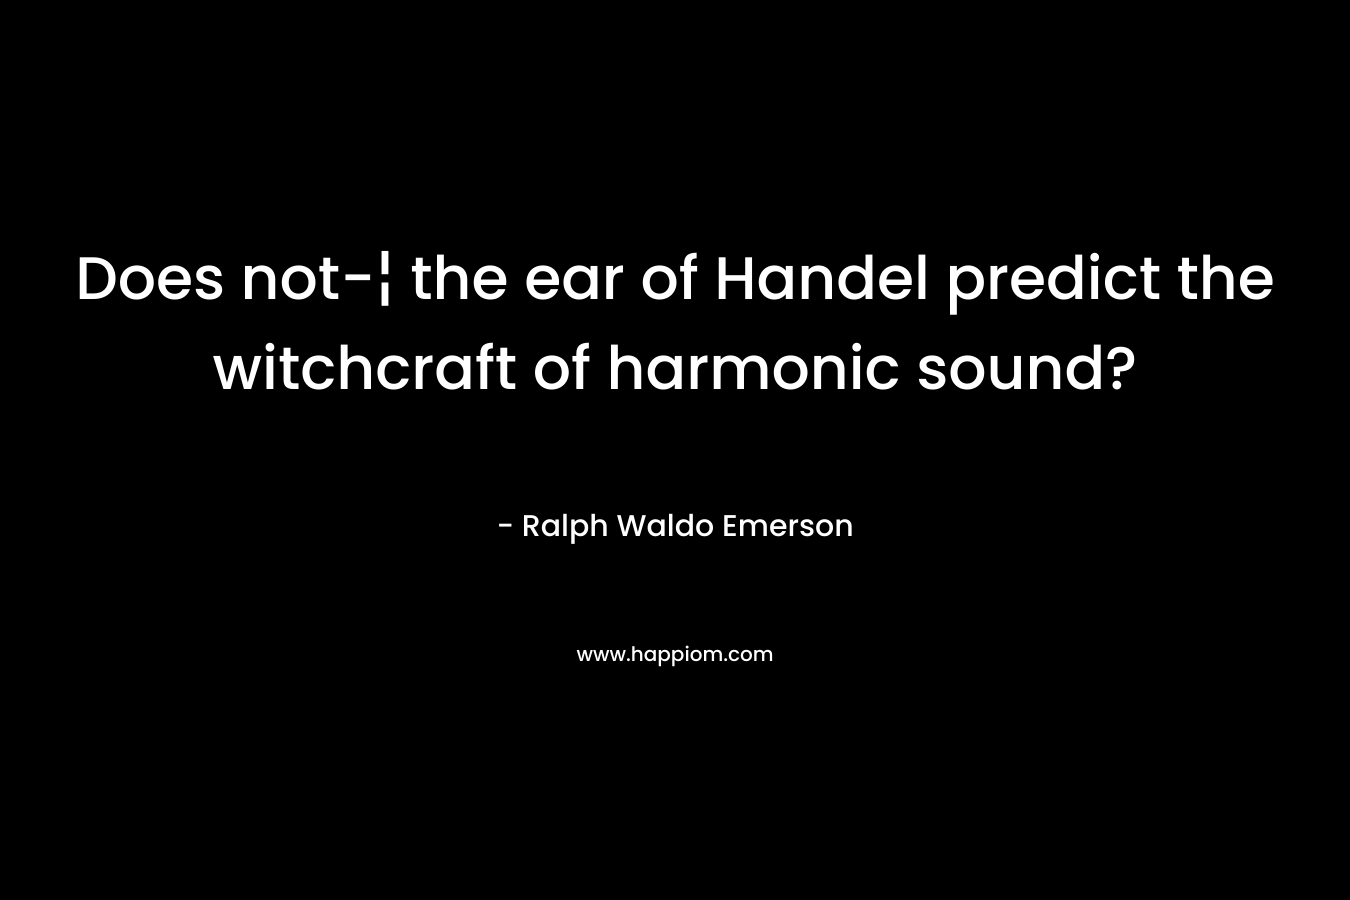 Does not-¦ the ear of Handel predict the witchcraft of harmonic sound?